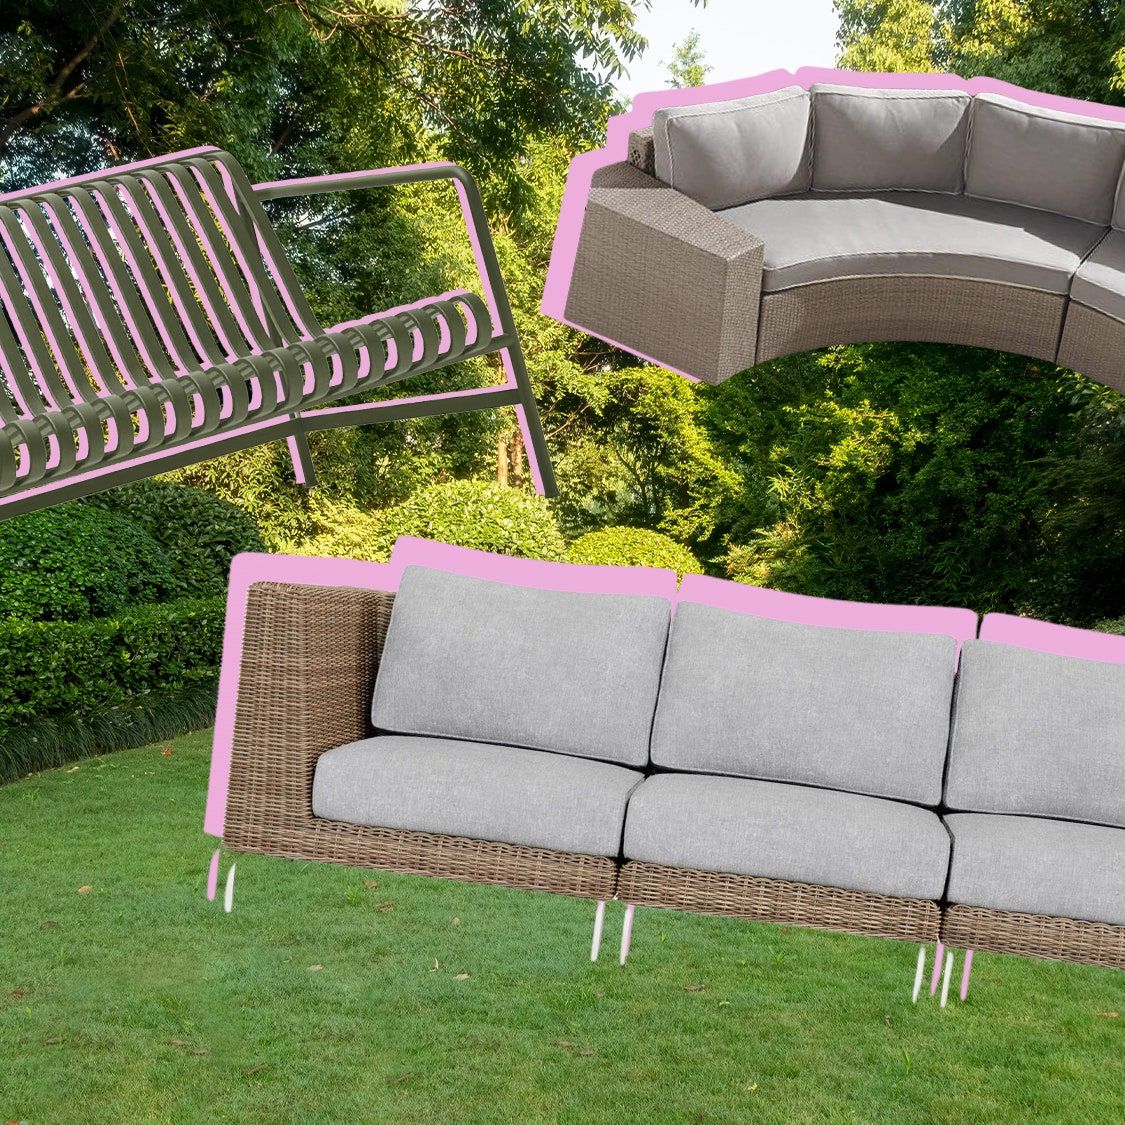 13 Best Outdoor Sofas 2023 To Gussy Up Your Deck Or Yard Area | Gq Regarding Loveseat Chairs For Backyard (View 7 of 15)